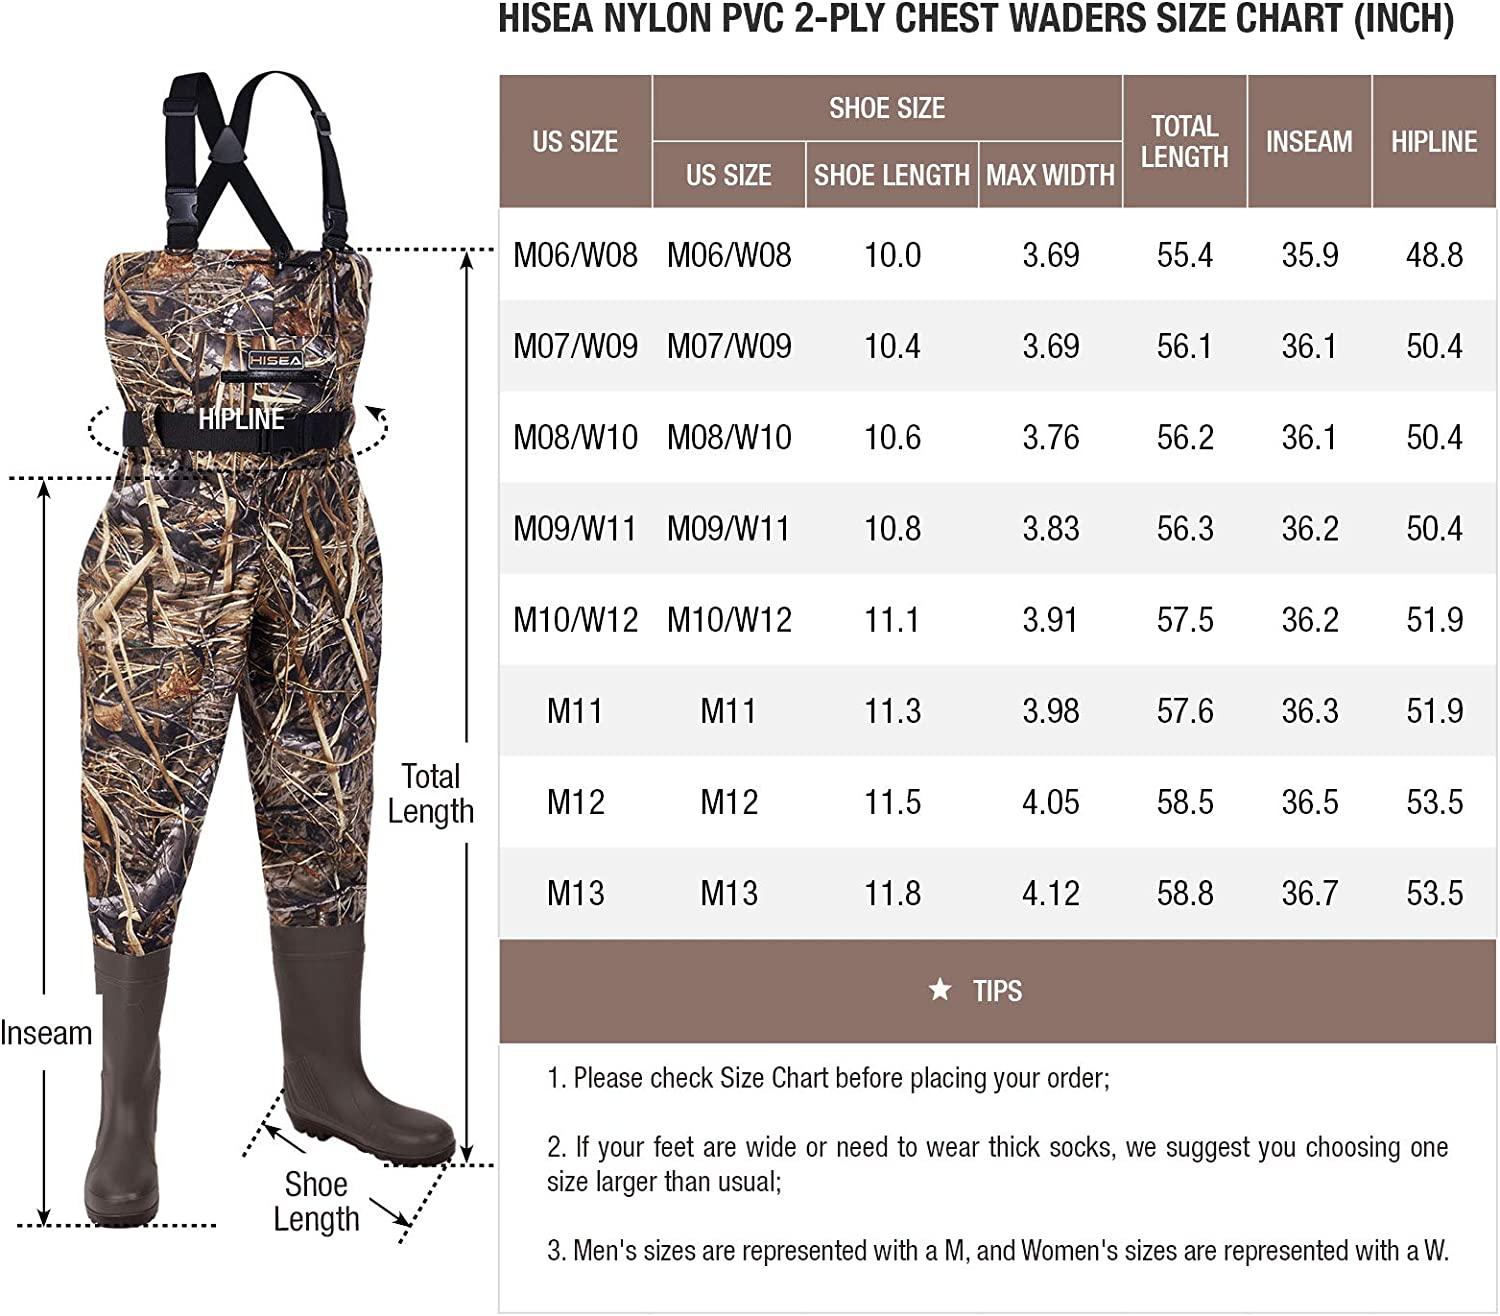 upgrade chest waders fishing waders for